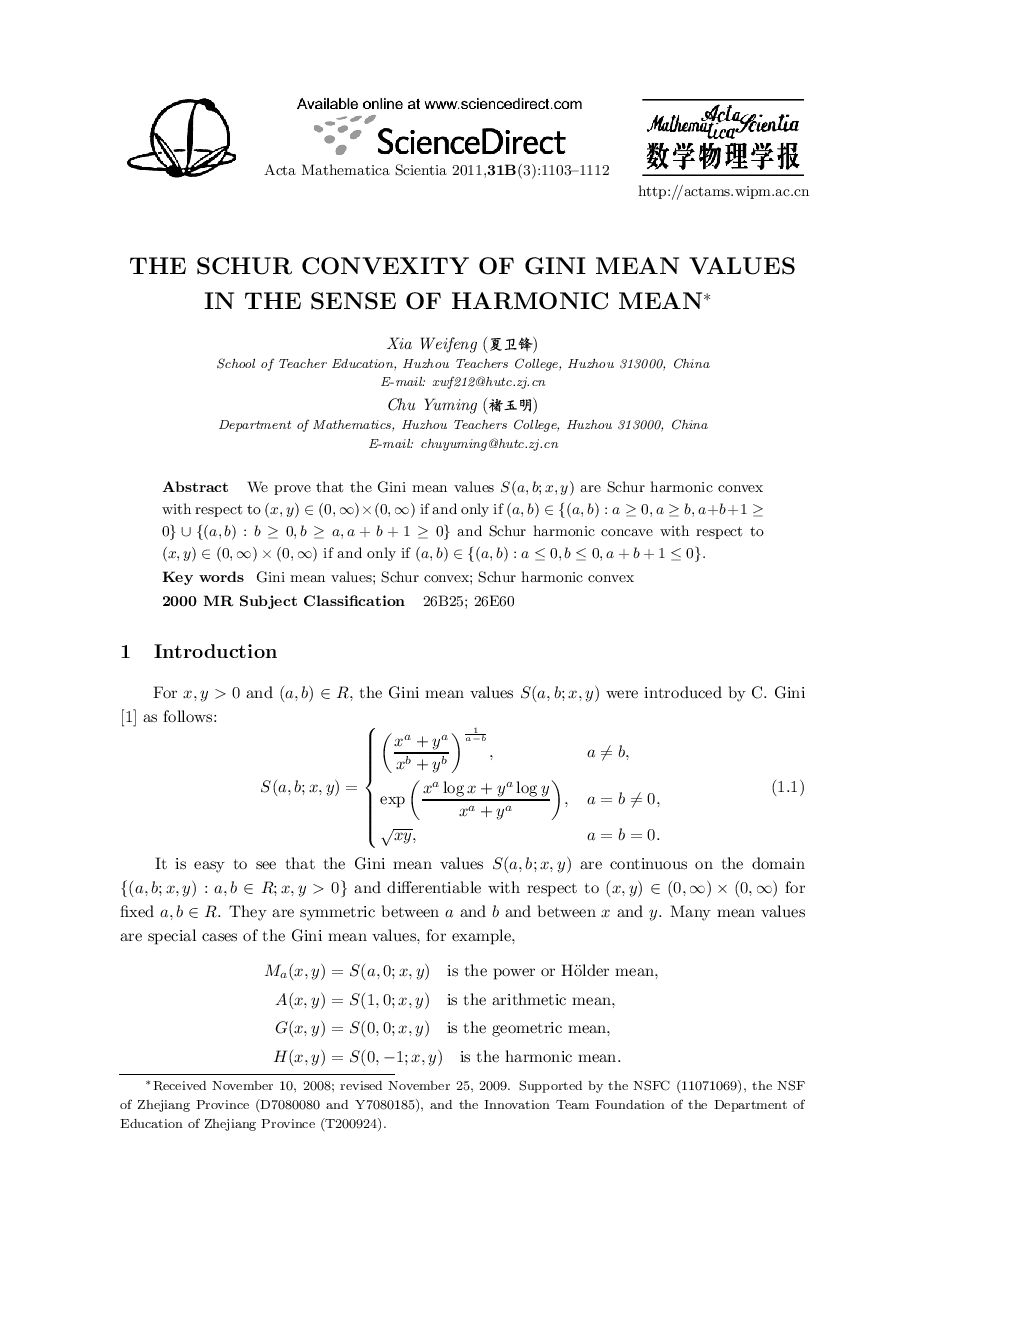 The schur convexity of gini mean values in the sense of harmonic mean 